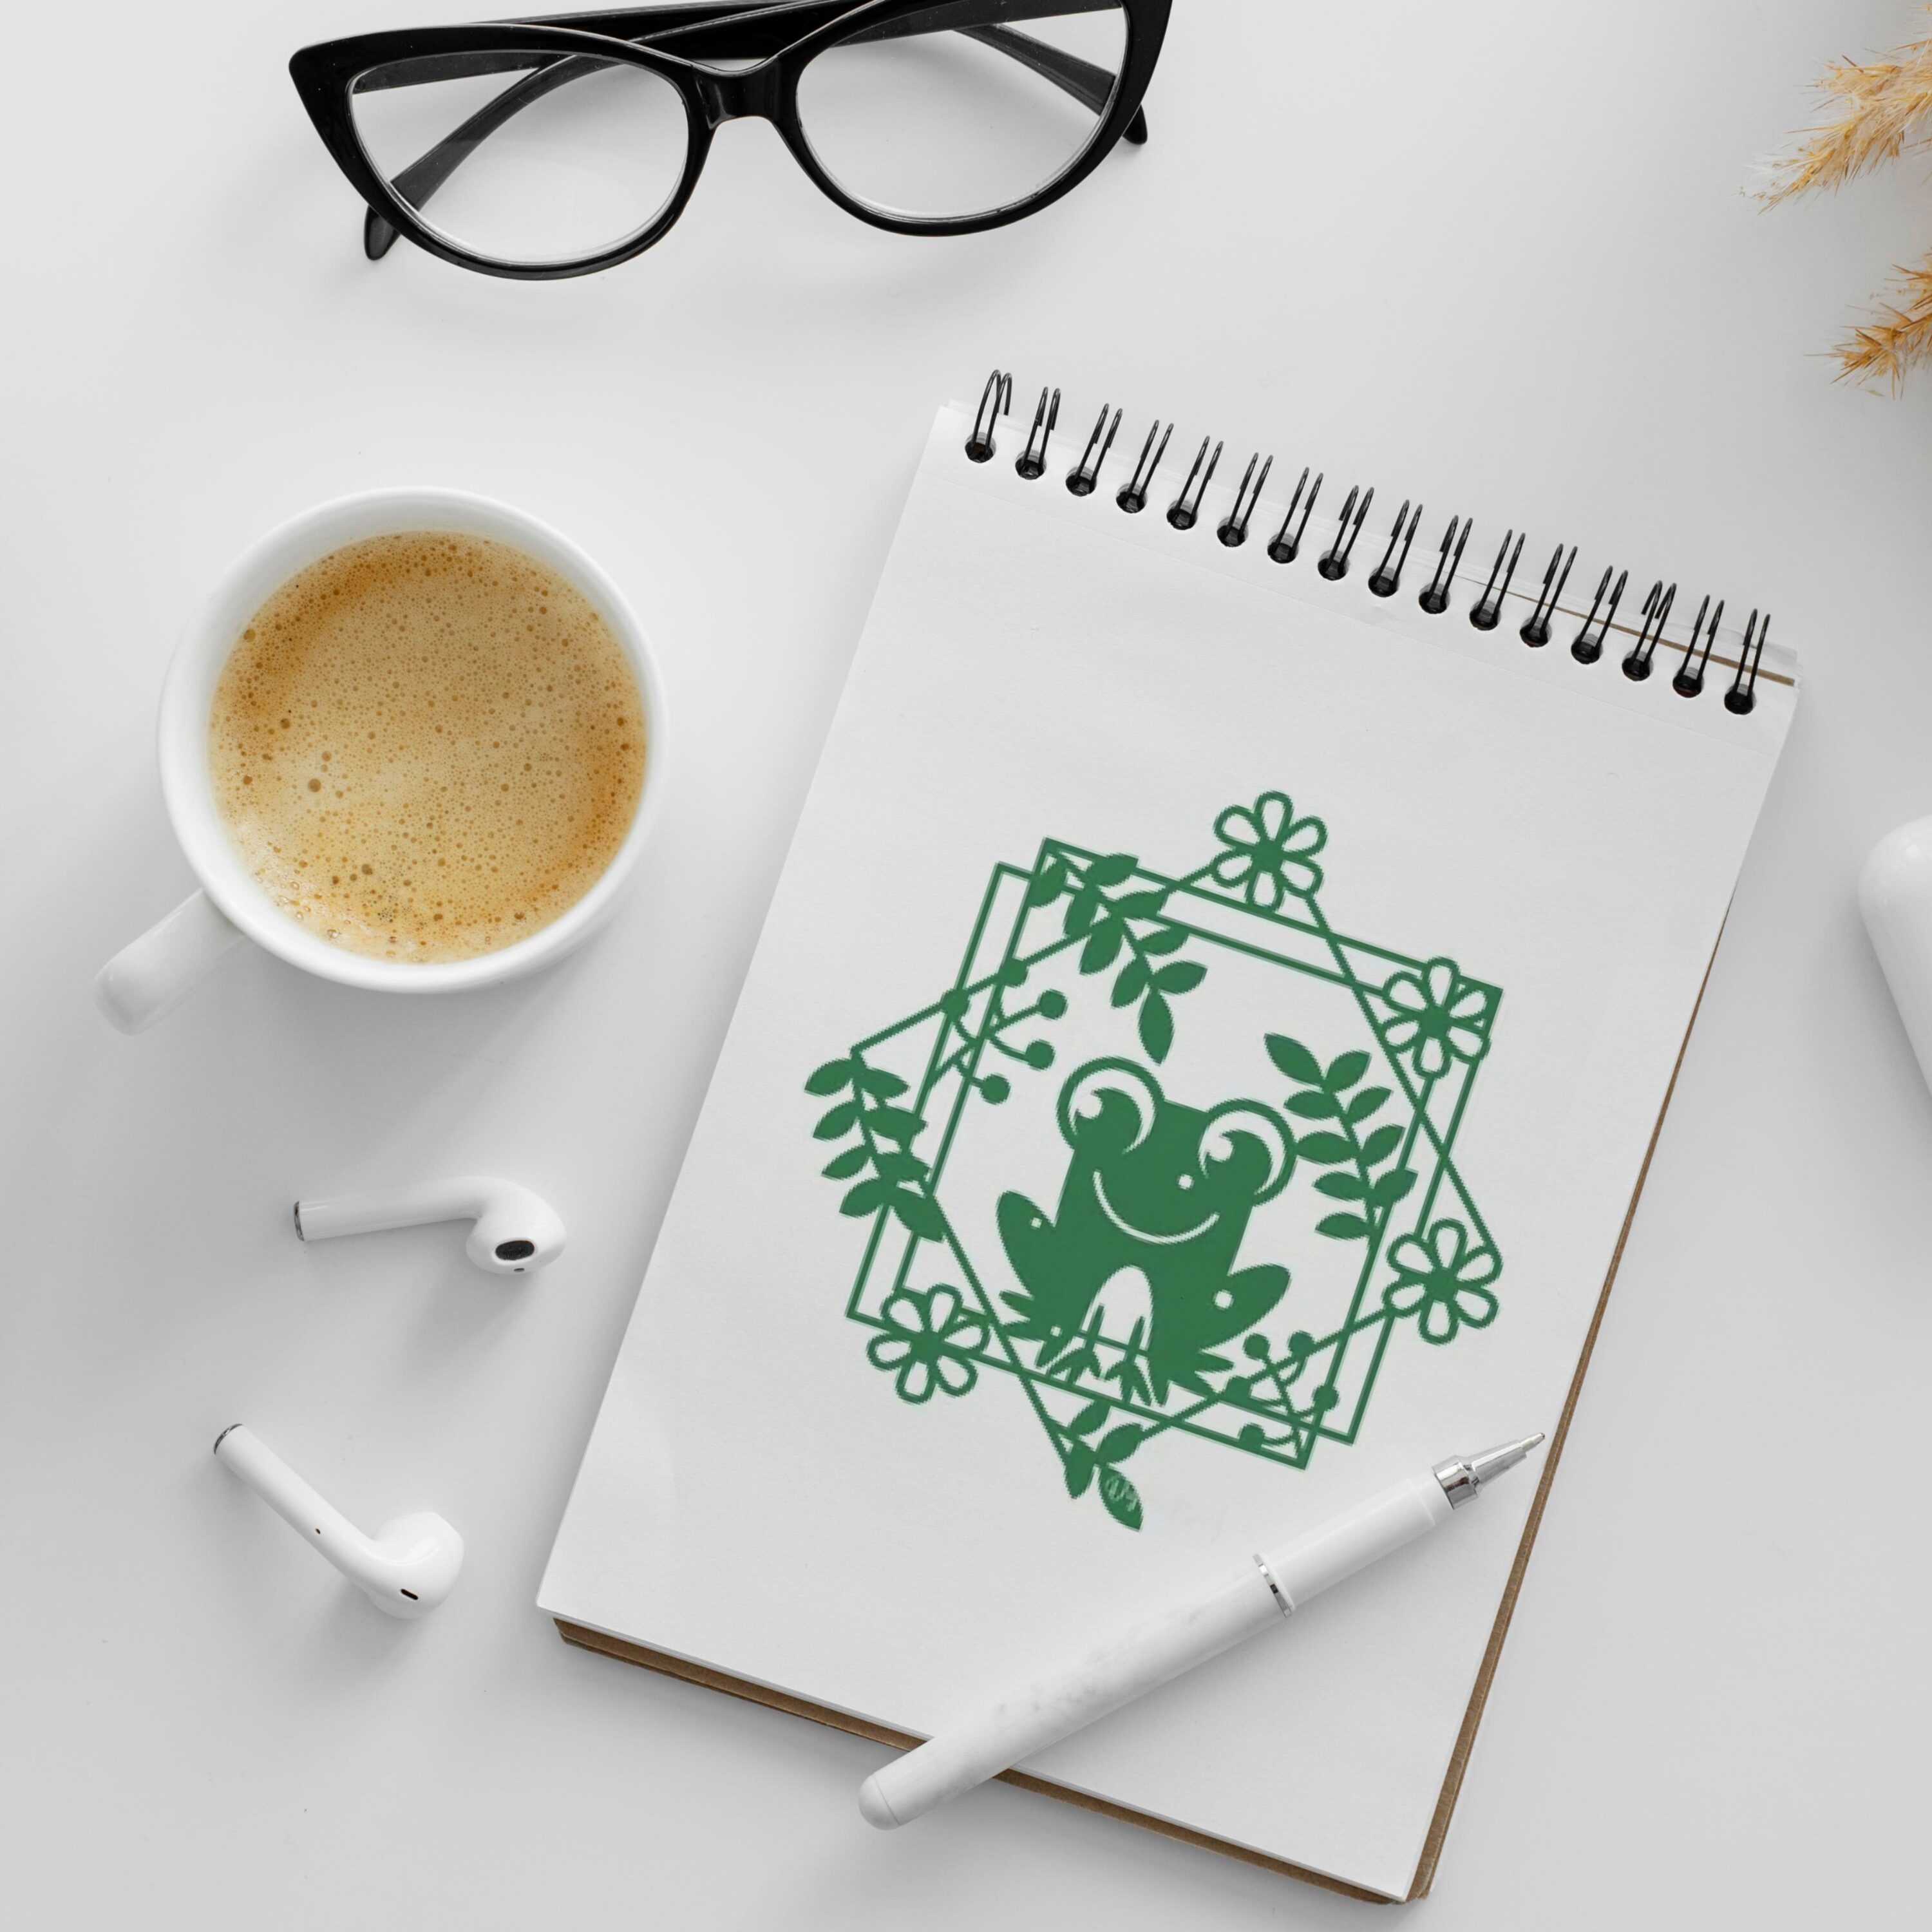 Notebook with a frog on it next to a cup of coffee.